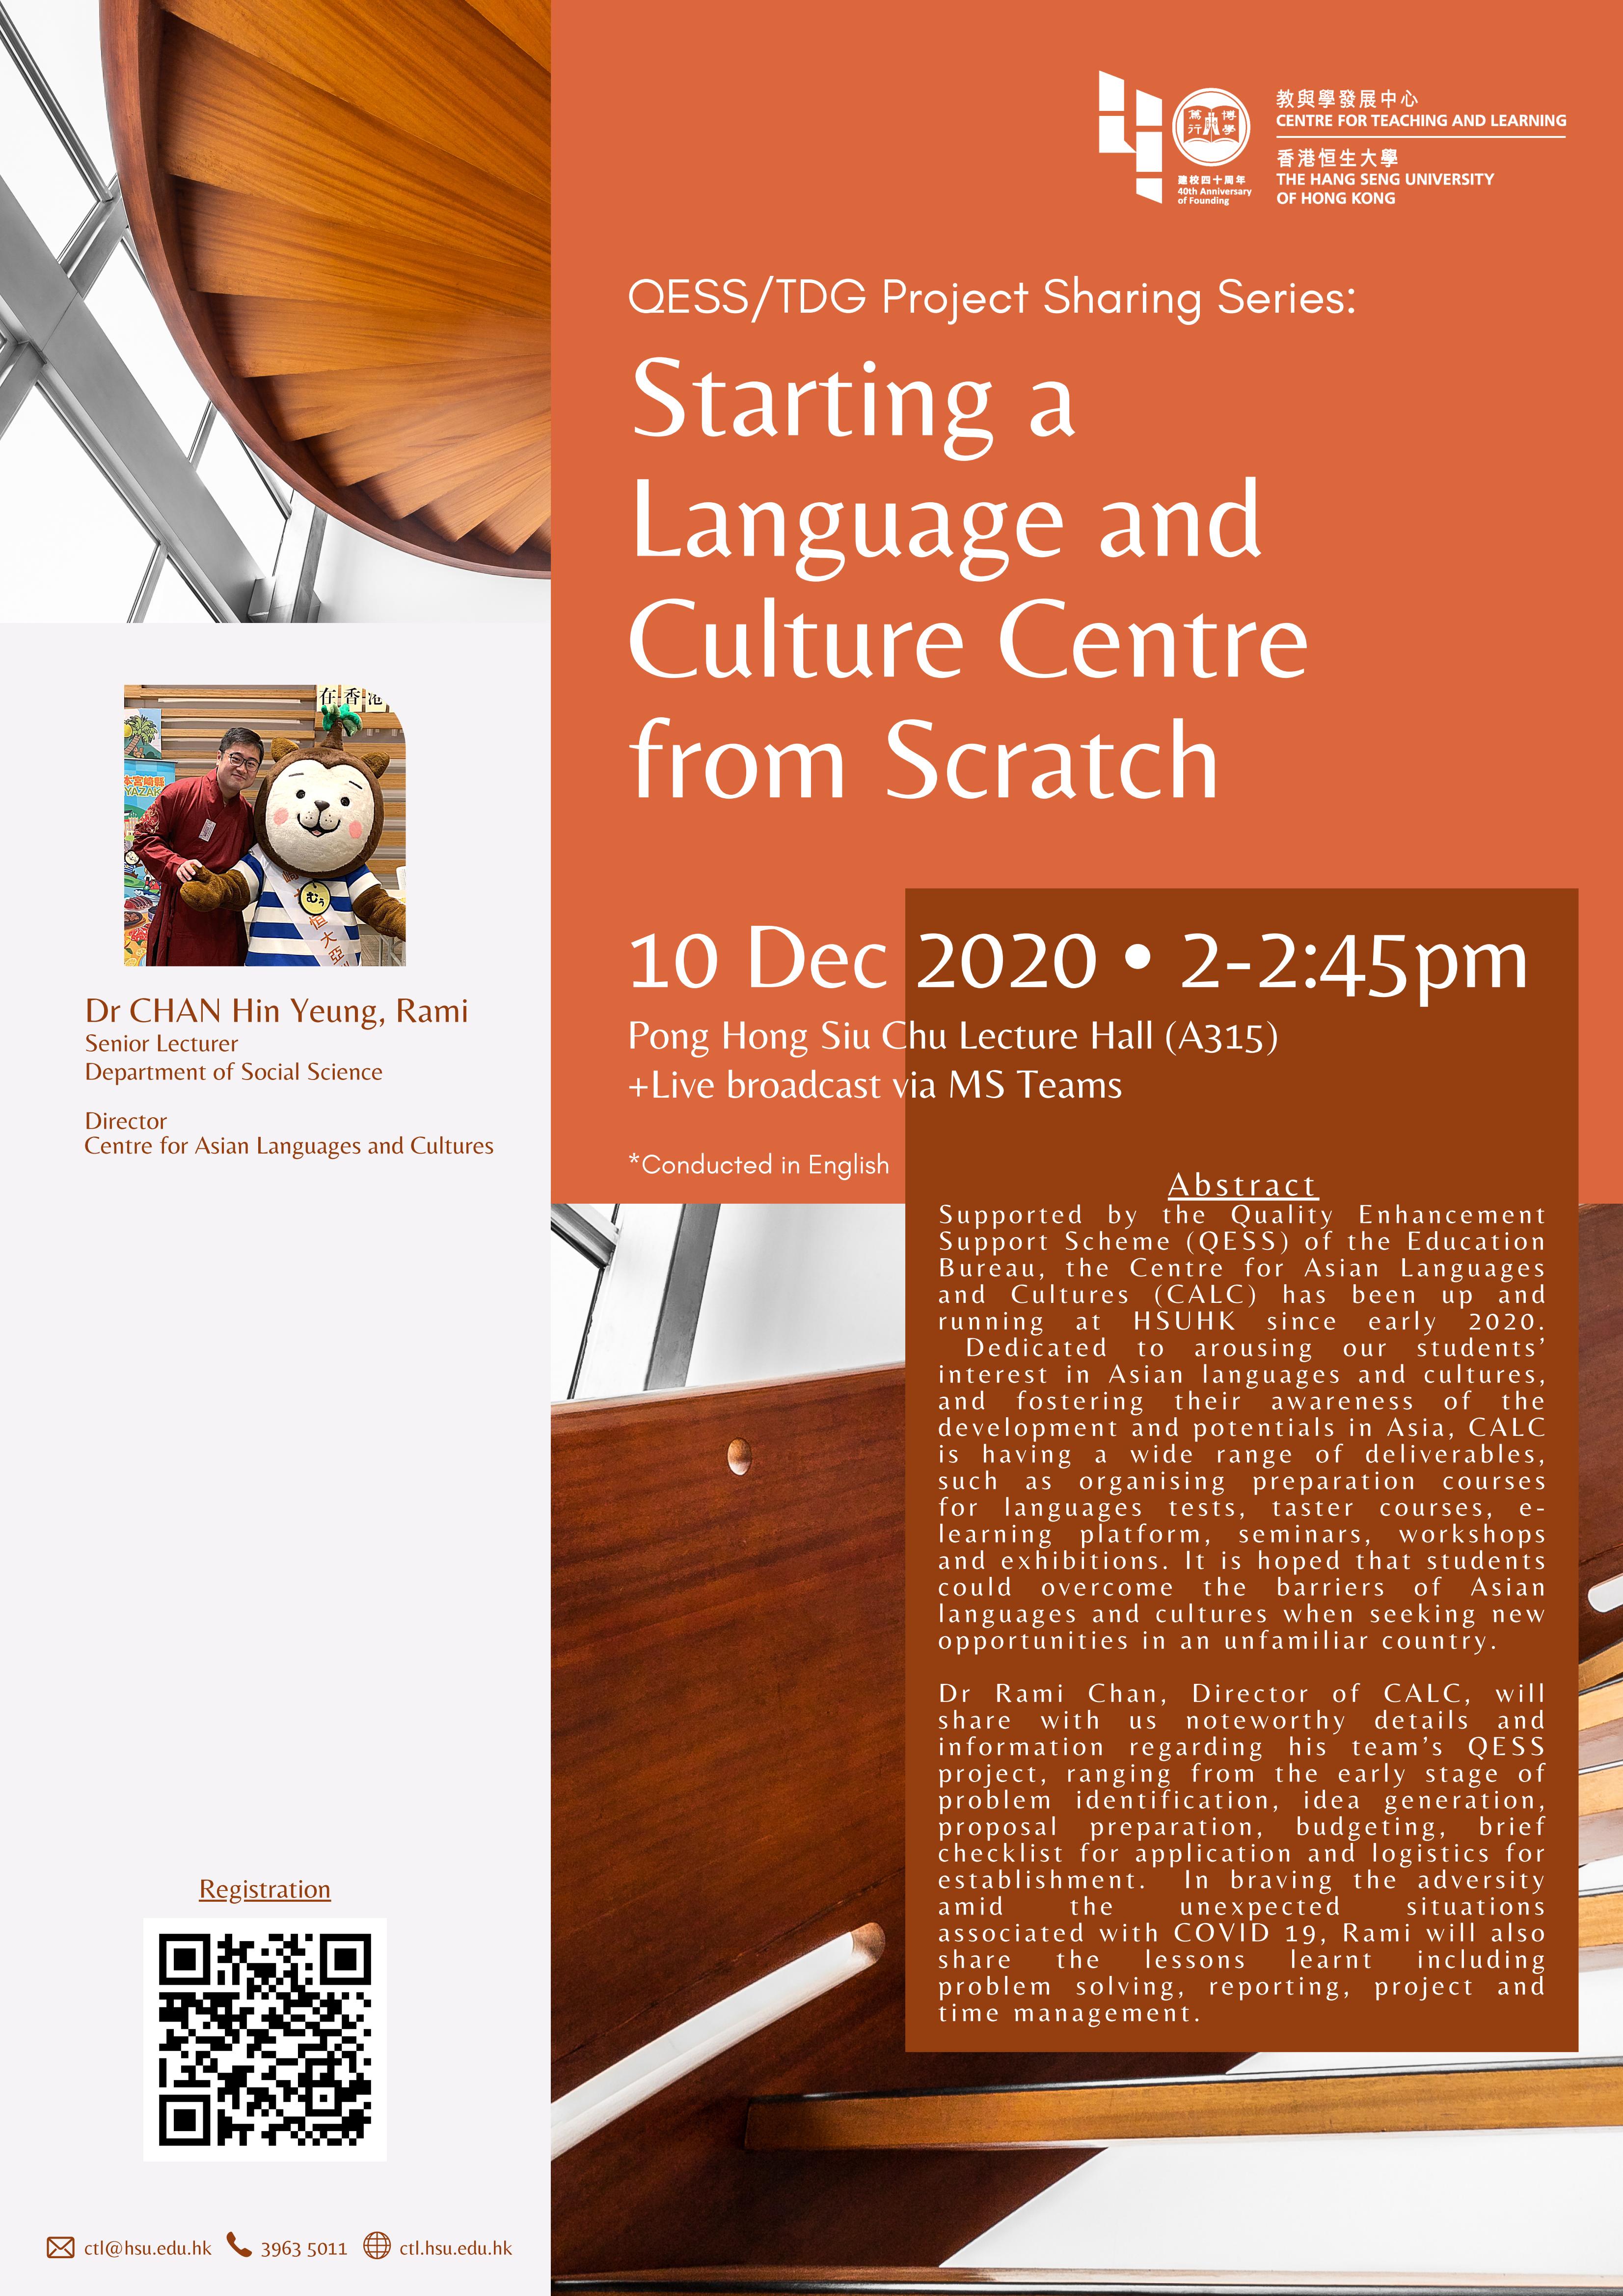 QESS/TDG Project Sharing Series #2: Starting a Language and Culture Centre from Scratch